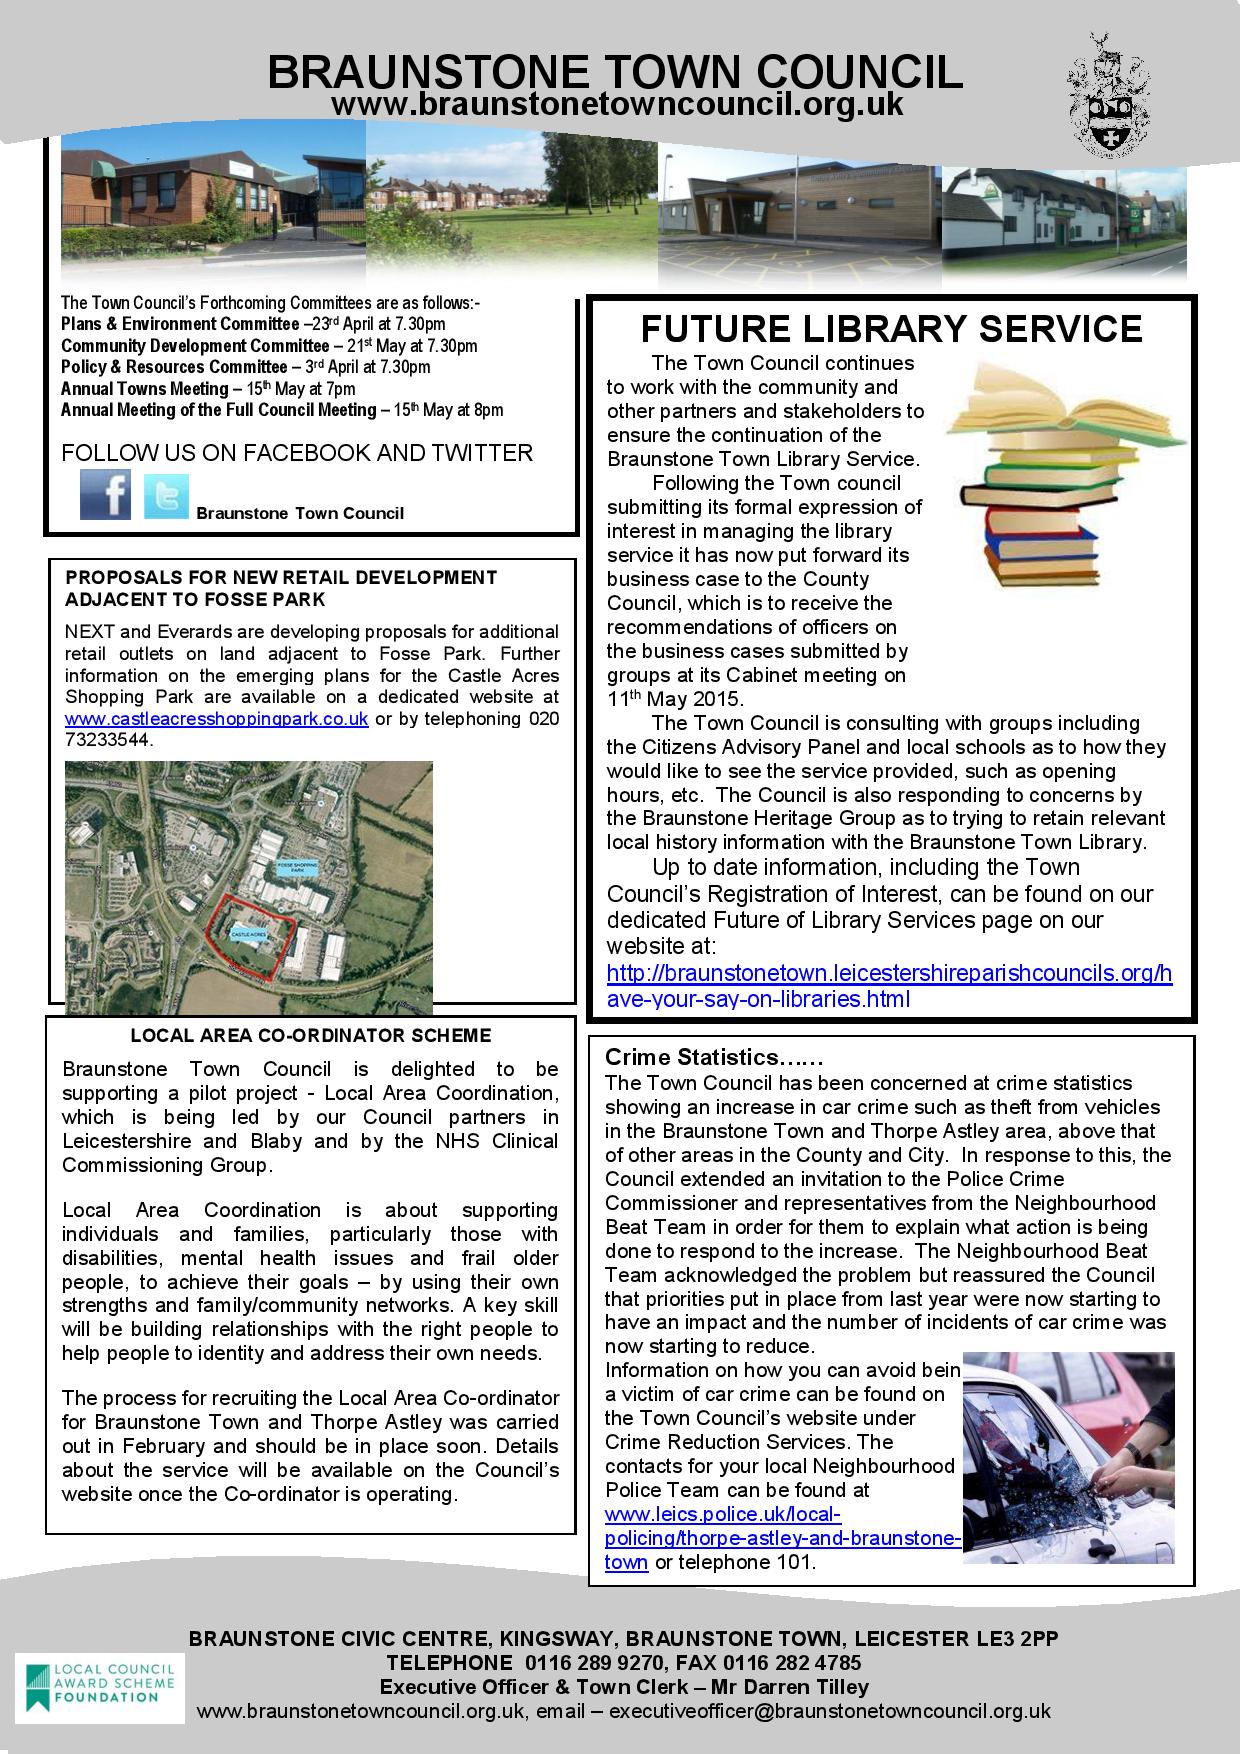 The Town Council article from the April 2015 issue of the Braunstone Life